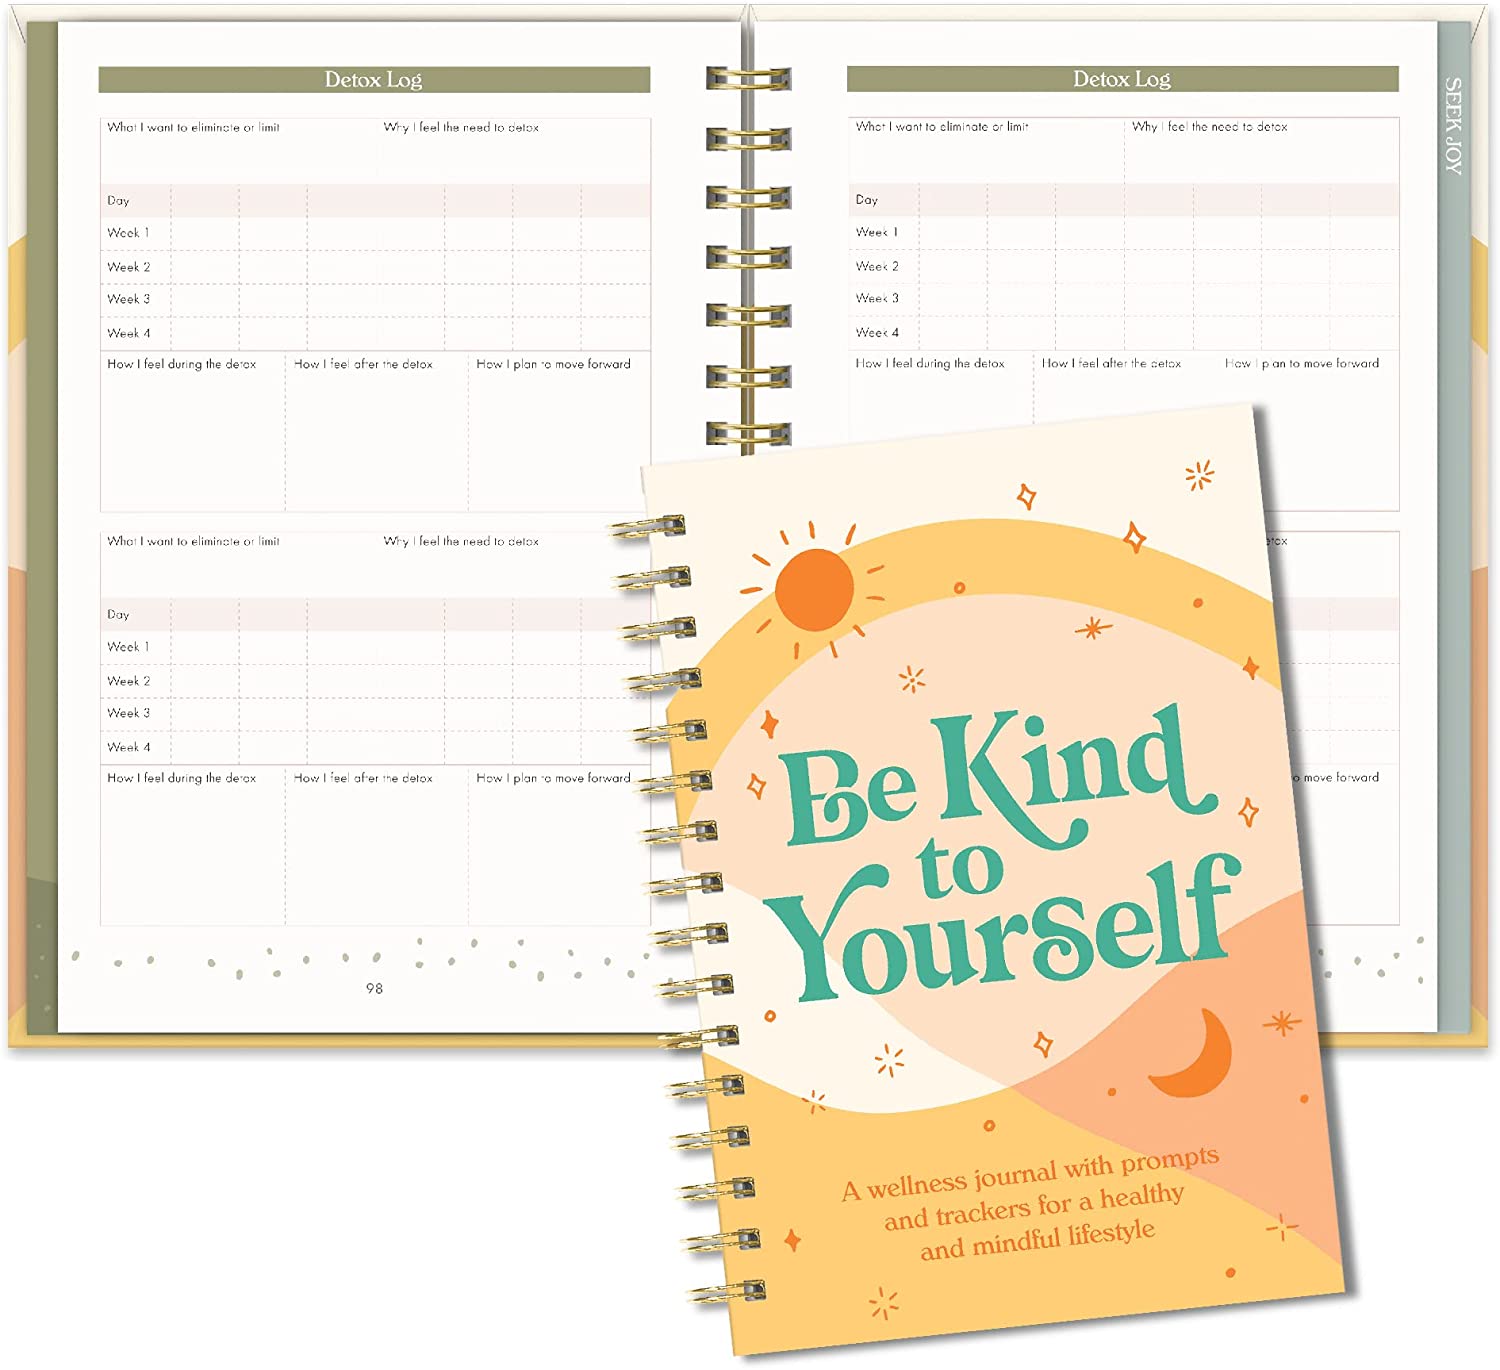 "Be Kind to Yourself" Self-Care Journal